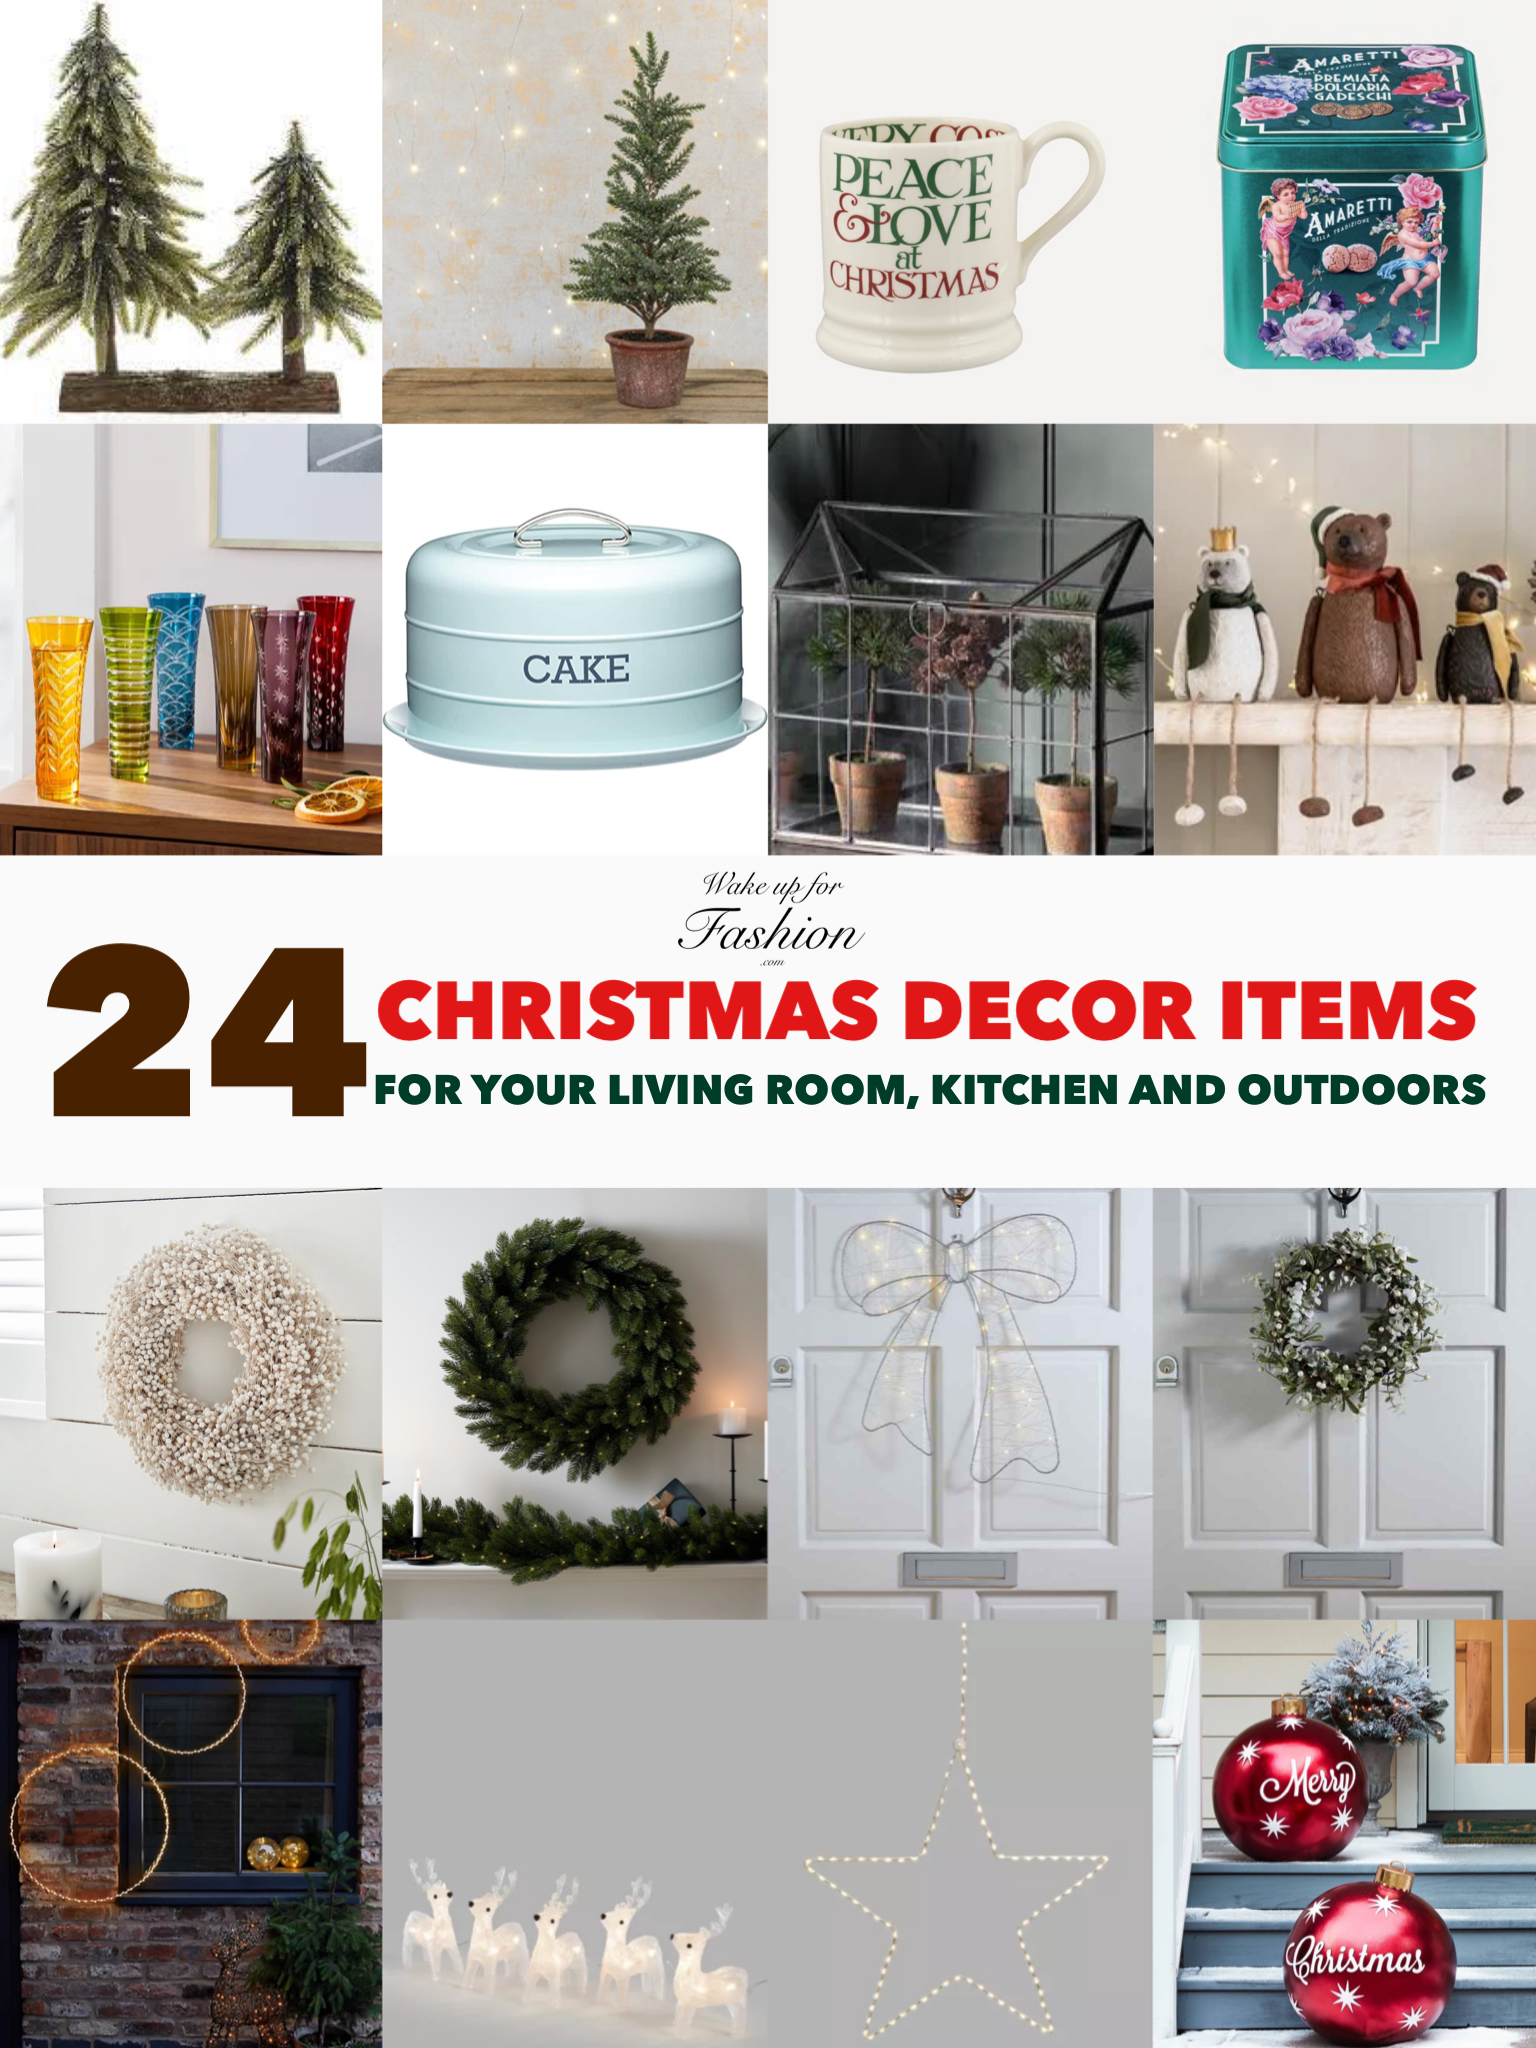 Collage of Christmas home decor for kitchen, living room and outdoors